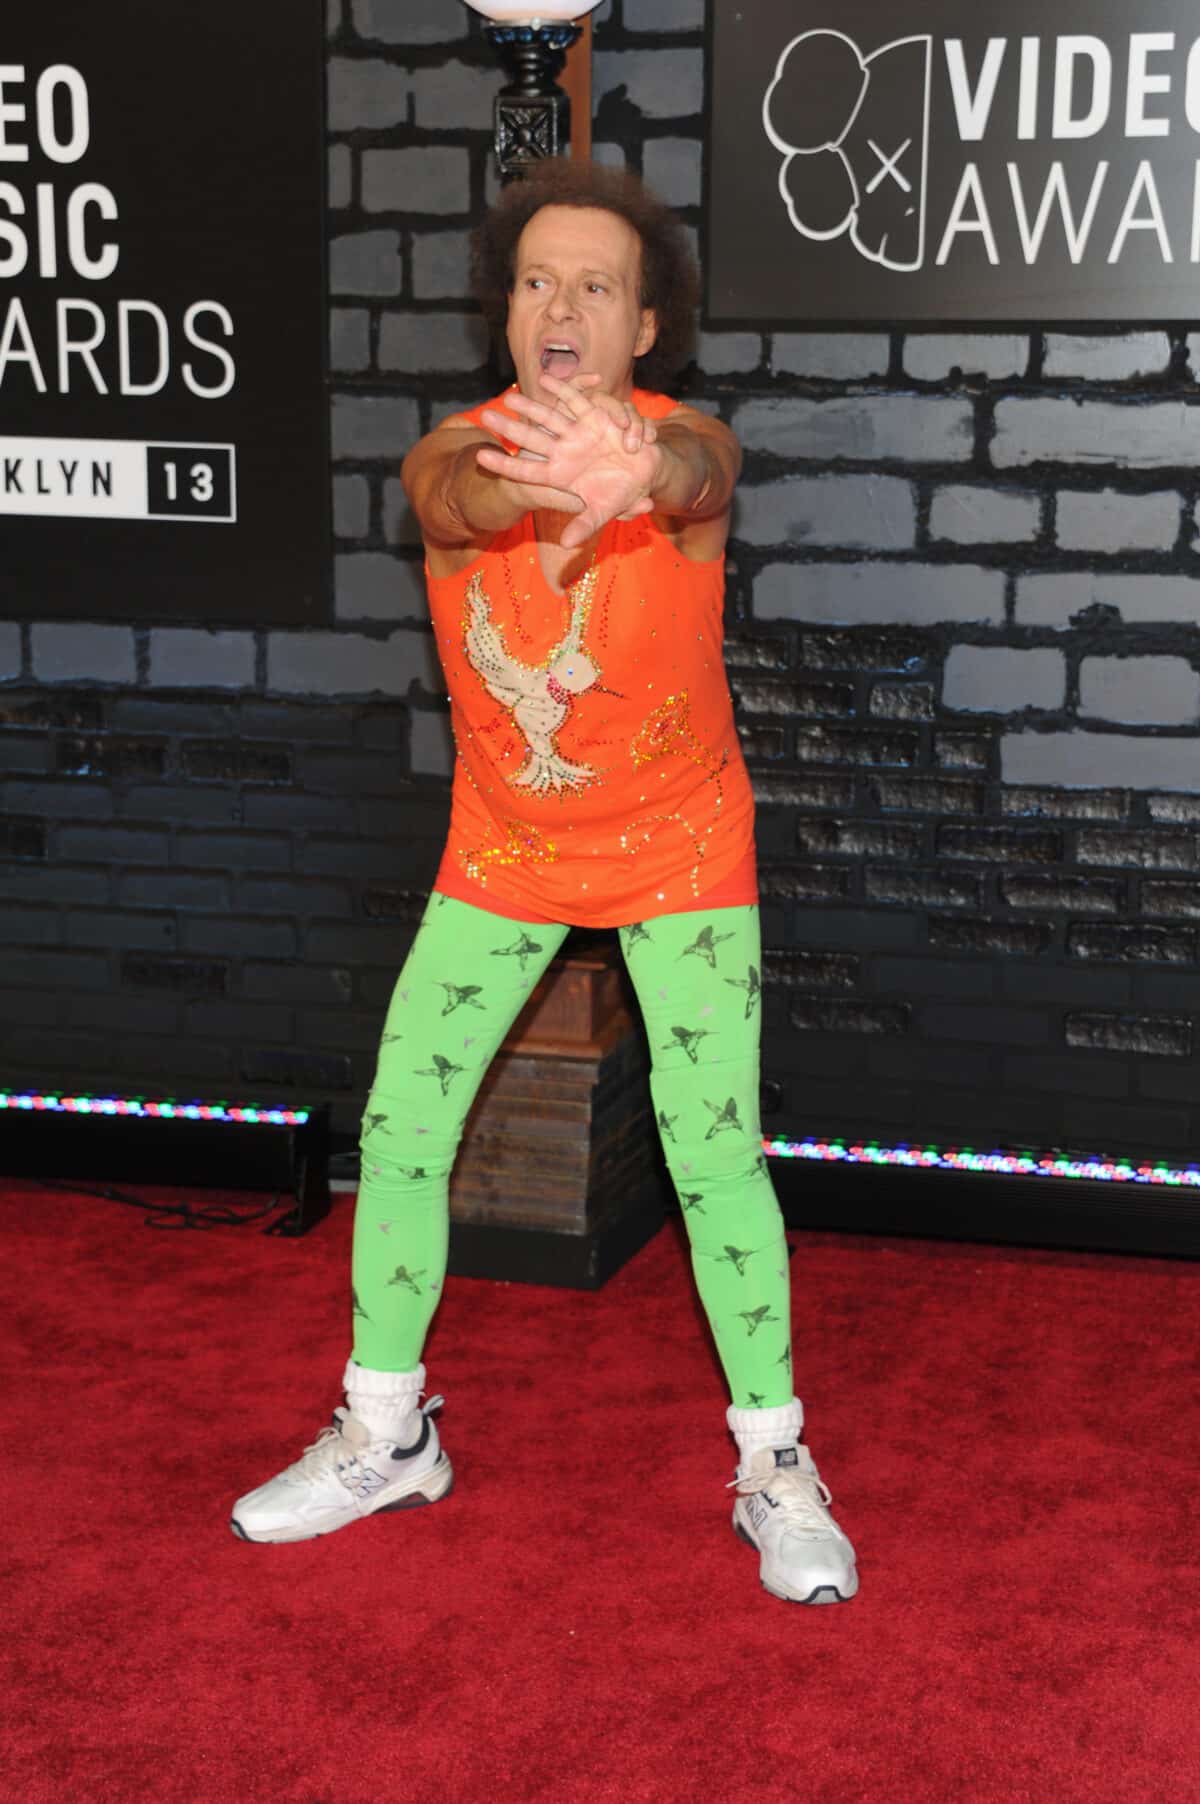 Richard Simmons arrives at the MTV Video Music Awards on Sunday, Aug. 25, 2013, at the Barclays Center in the Brooklyn borough of New York. Image: Evan Agostini/Invision/AP